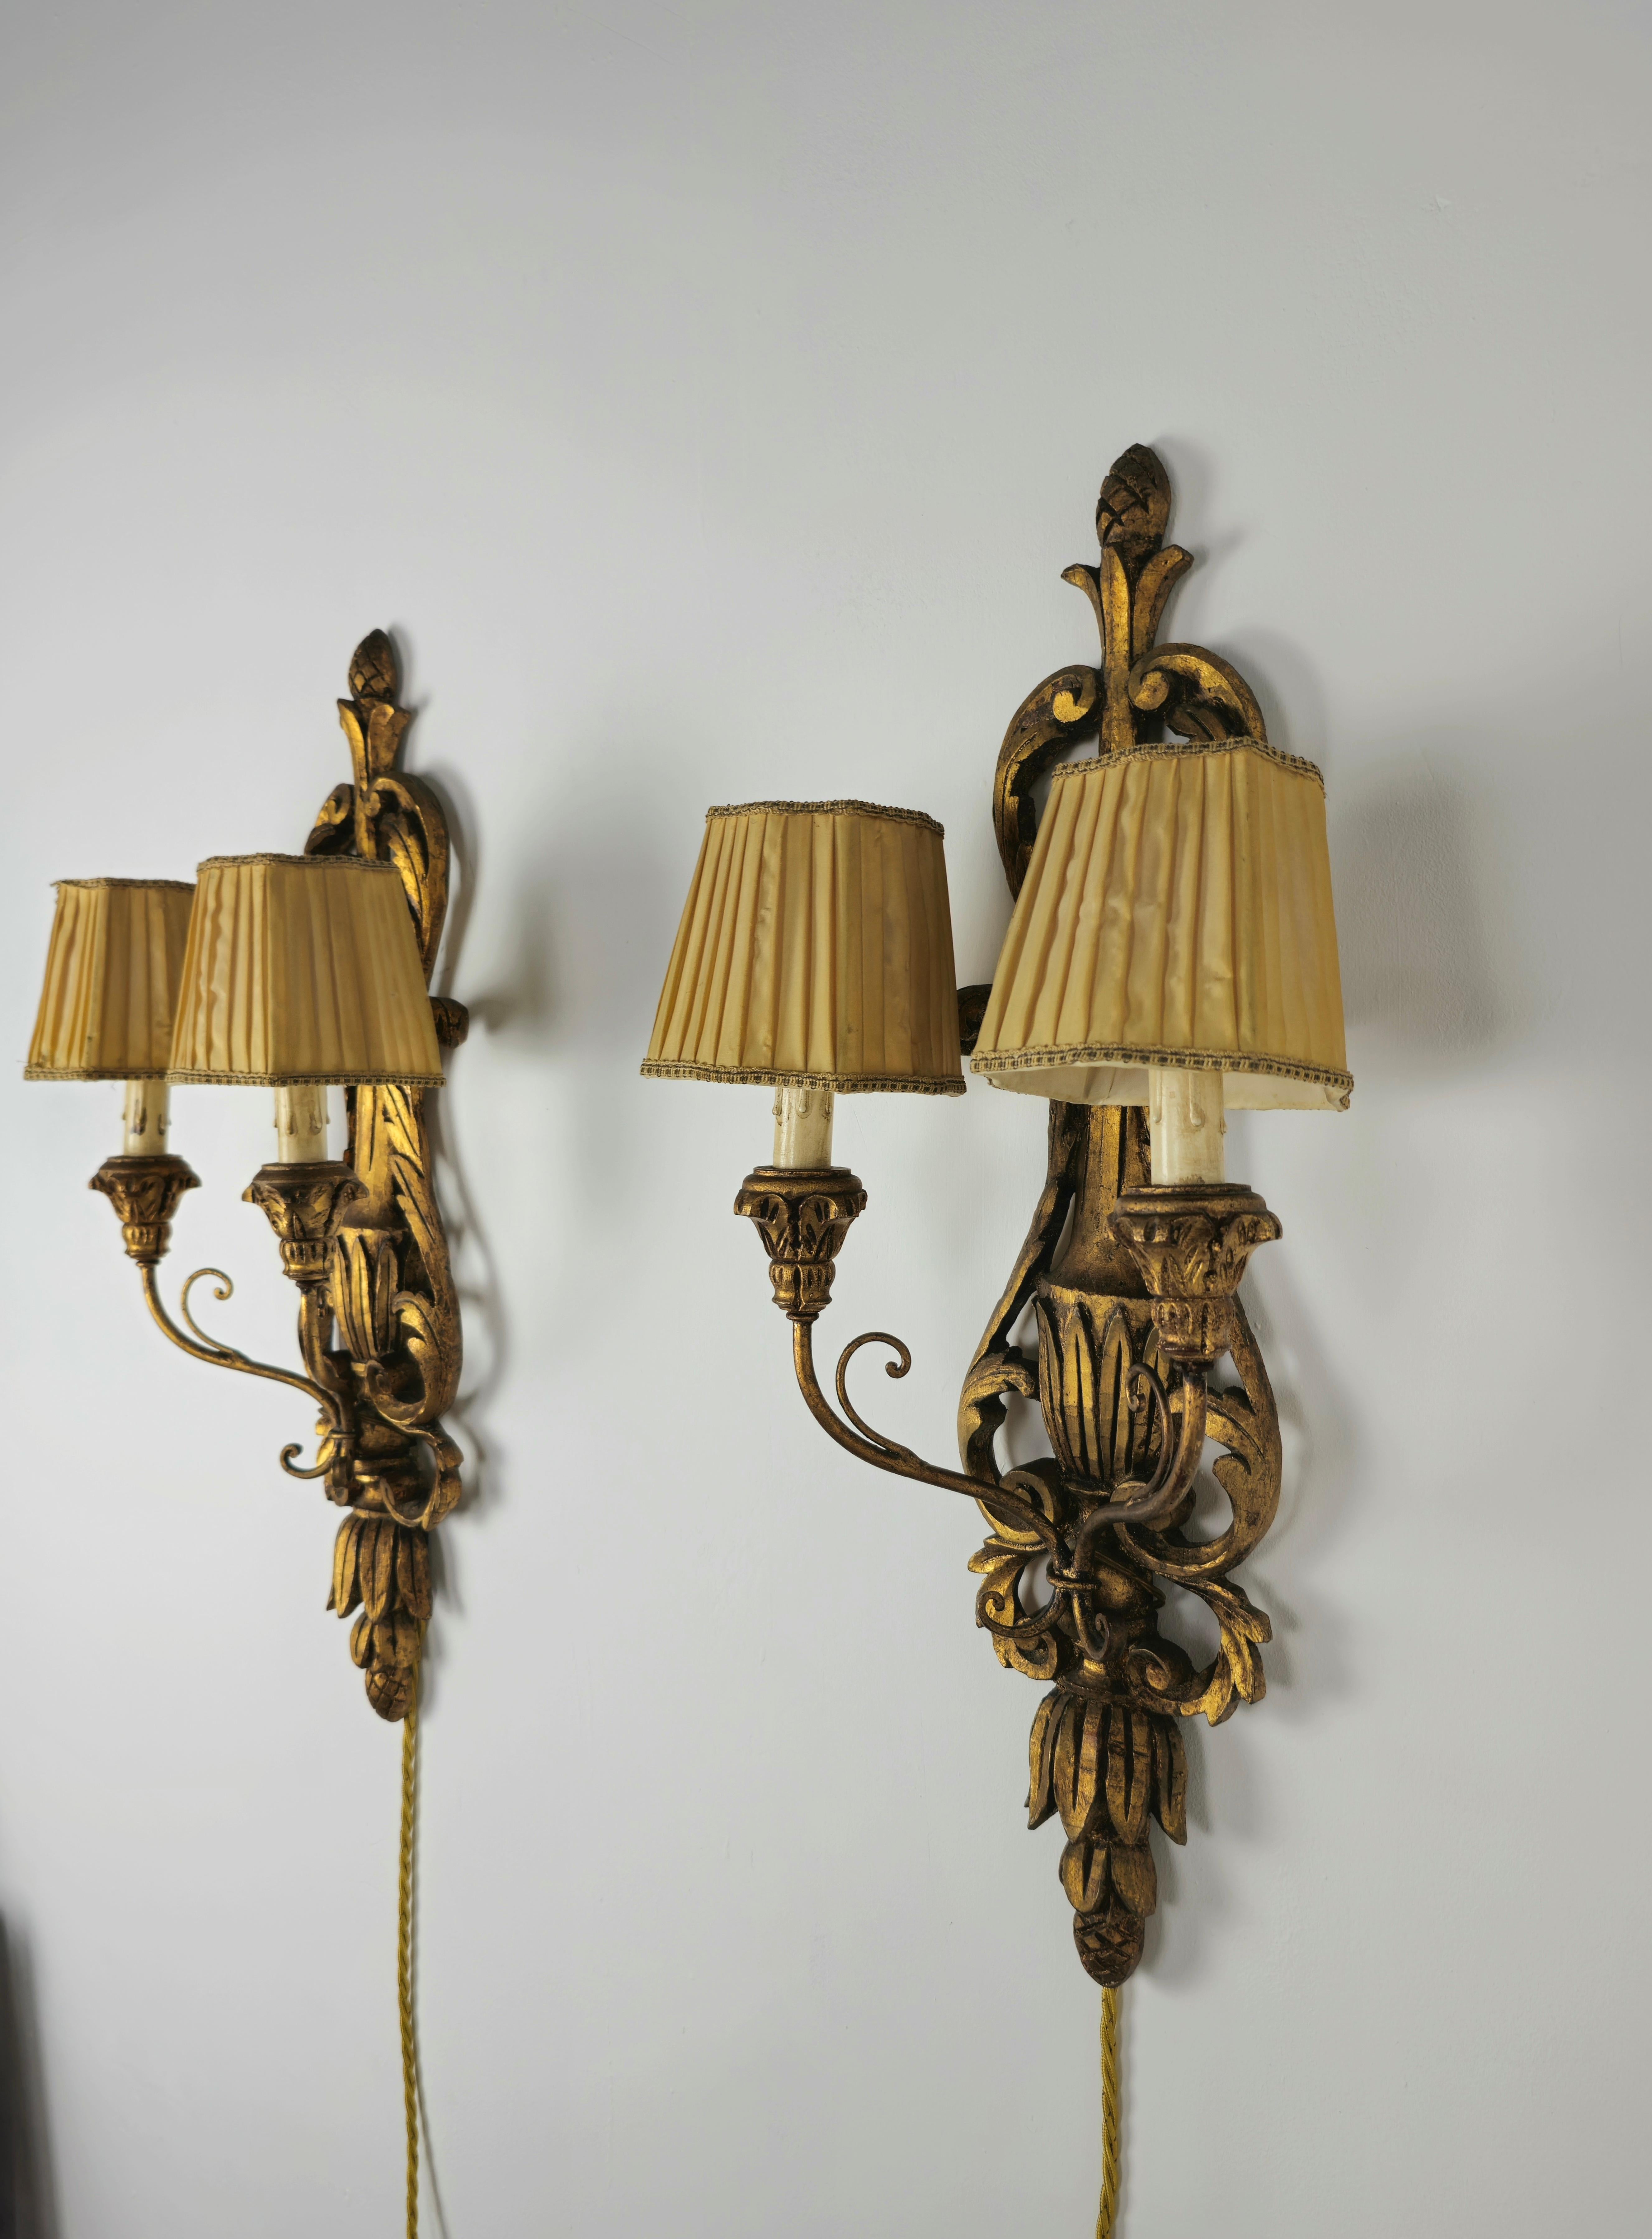 Pair of Wall Lights Sconces Wood Carved Silk Midcentury Italian Design 1950s  For Sale 2